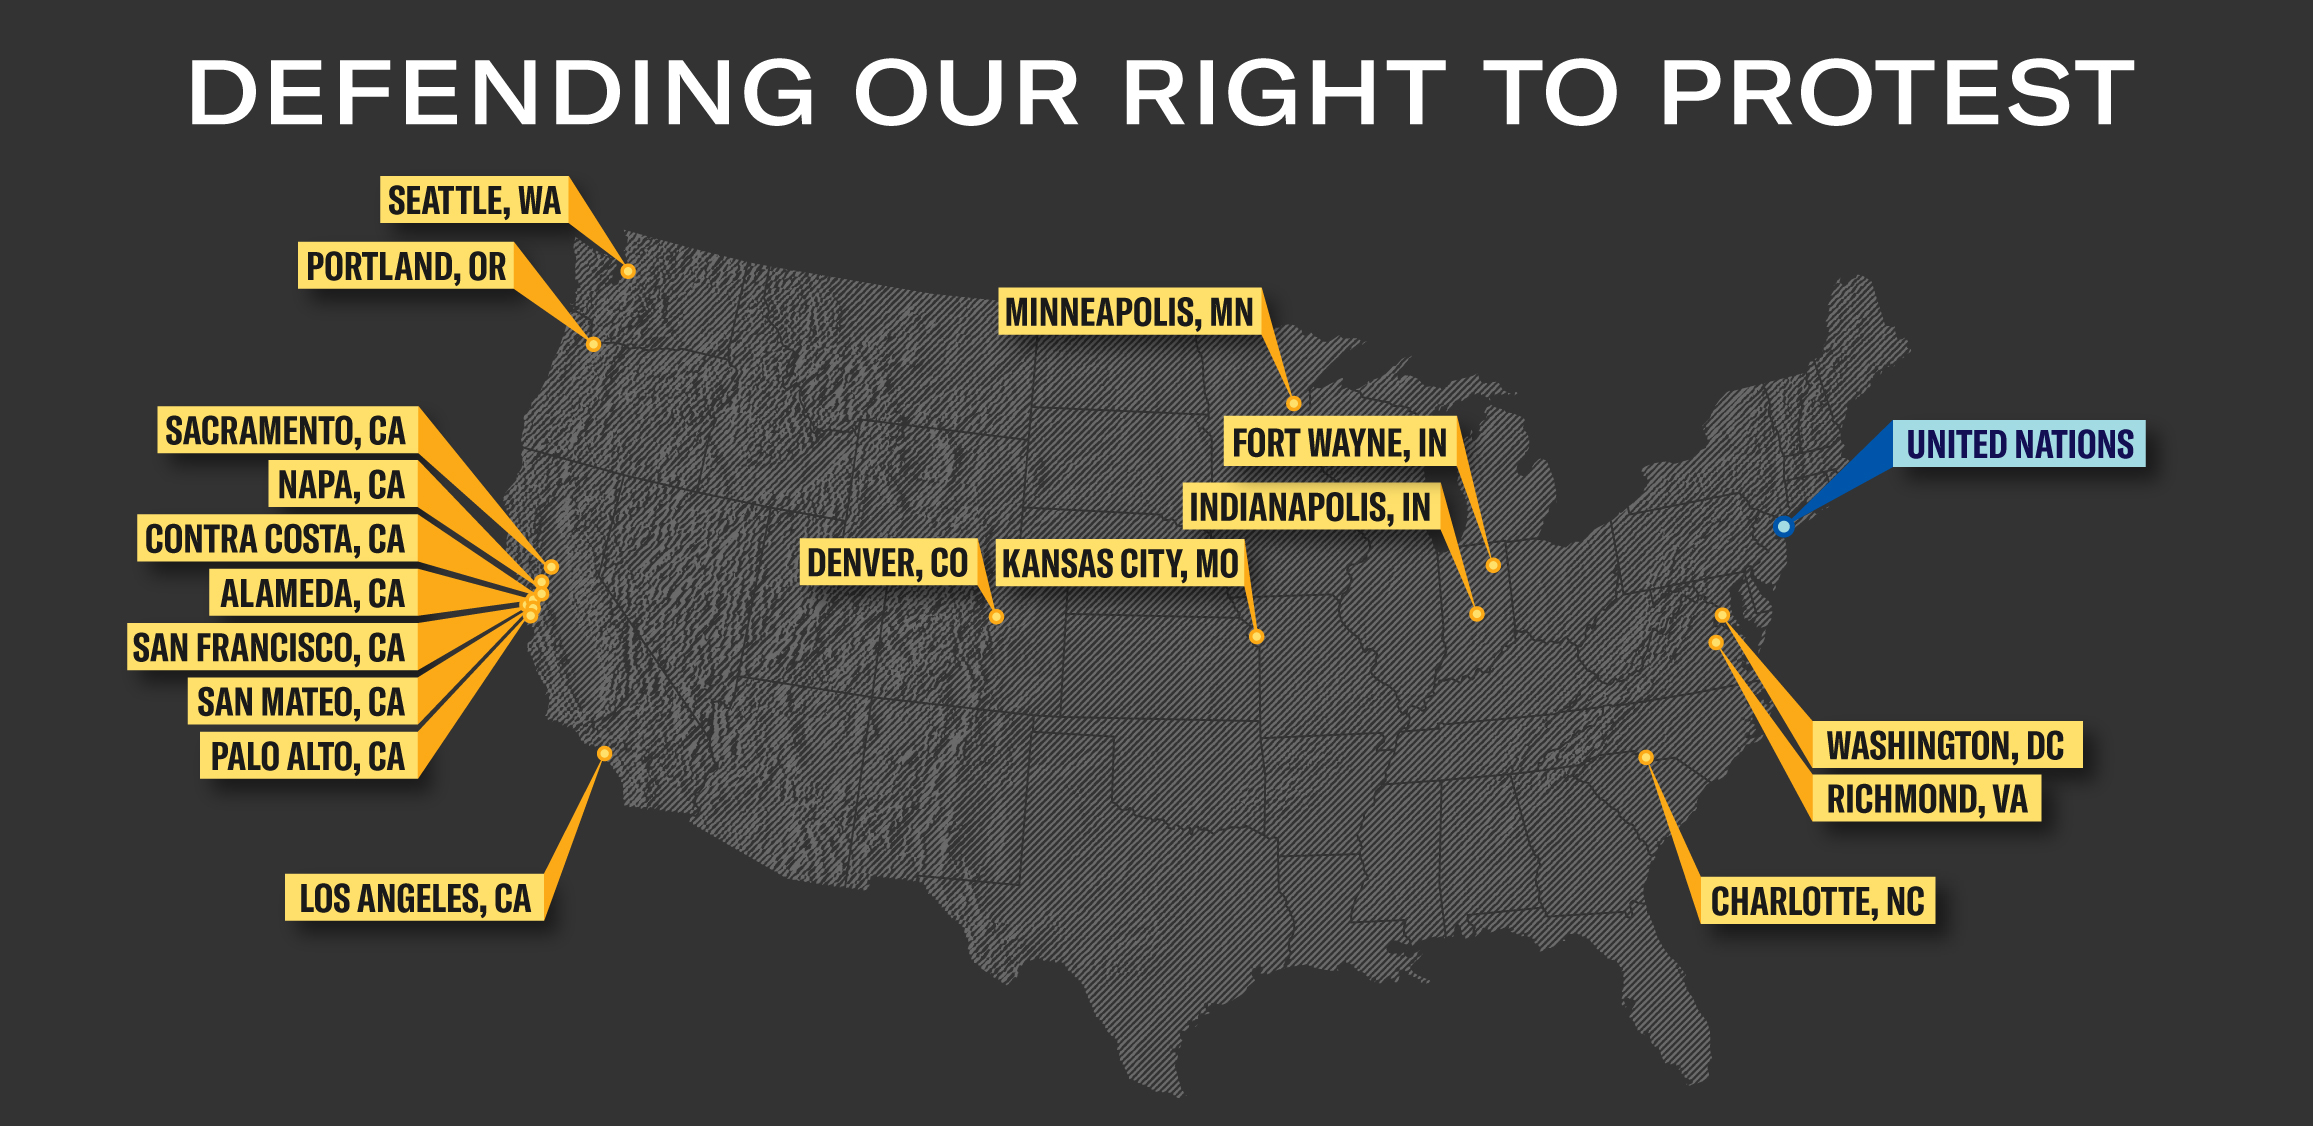 Defending our right to protest: cities where we've filed lawsuits.